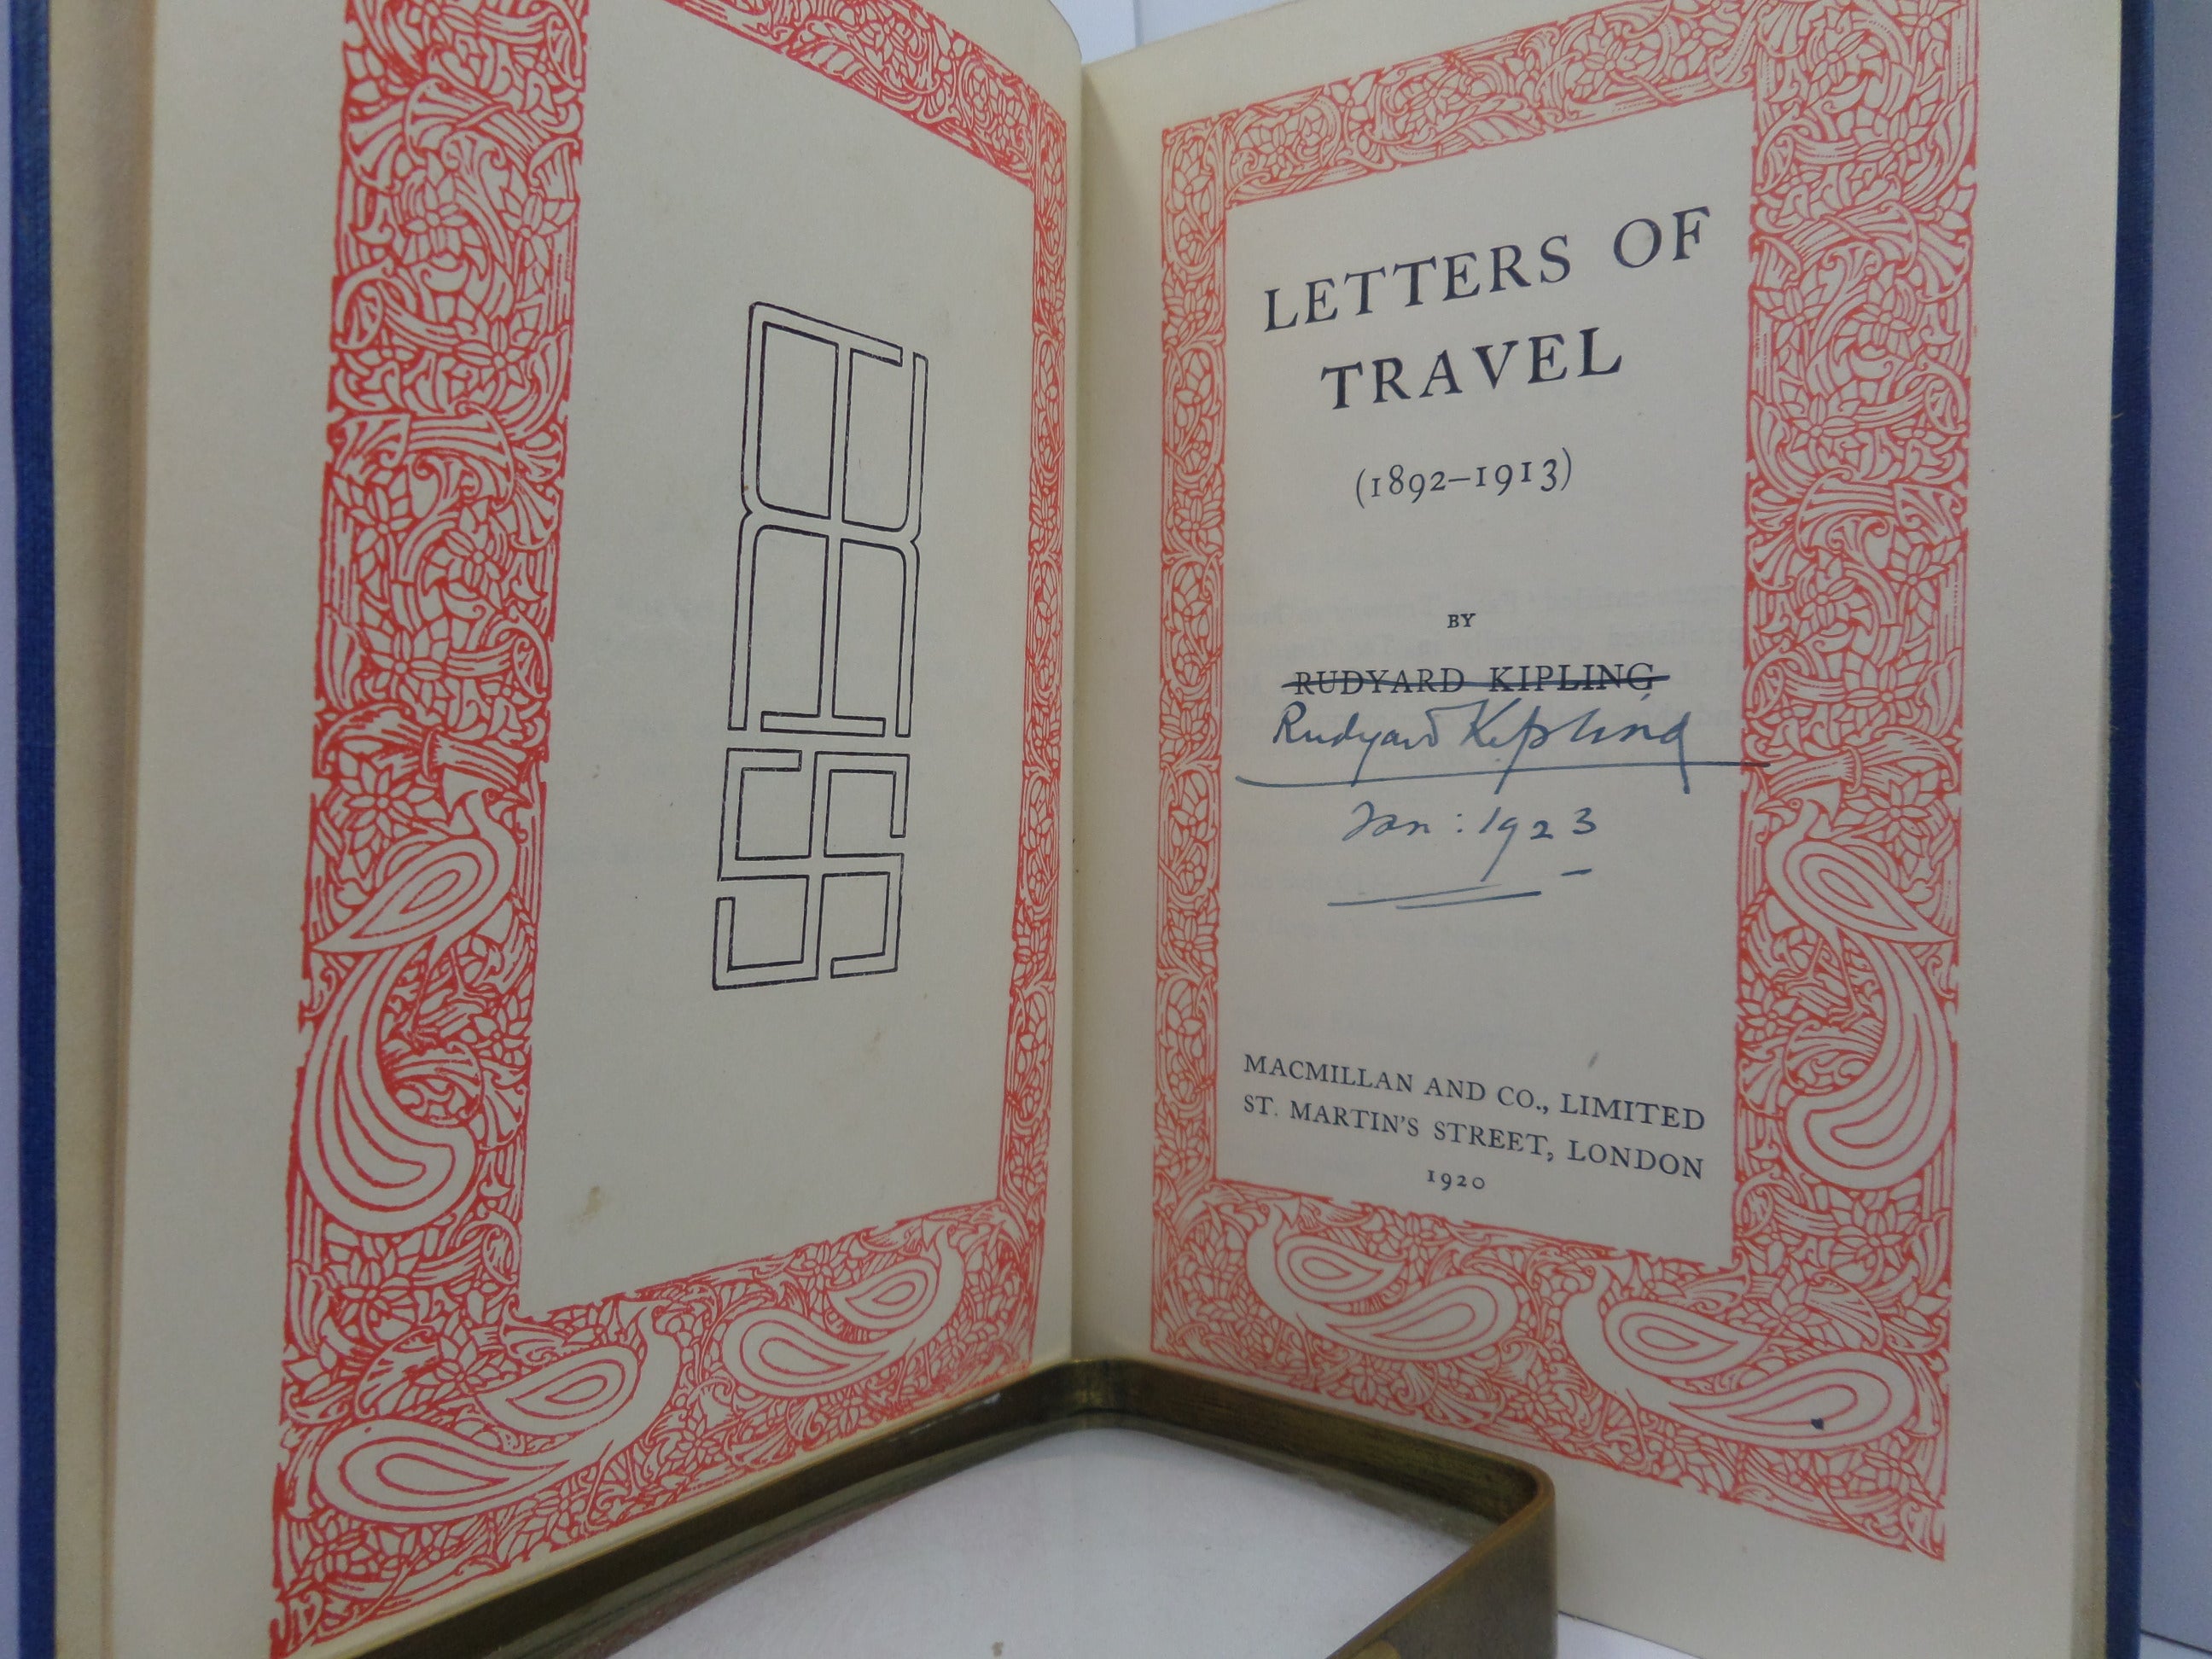 LETTERS OF TRAVEL (1892-1913) BY RUDYARD KIPLING 1920 SIGNED FIRST EDITION